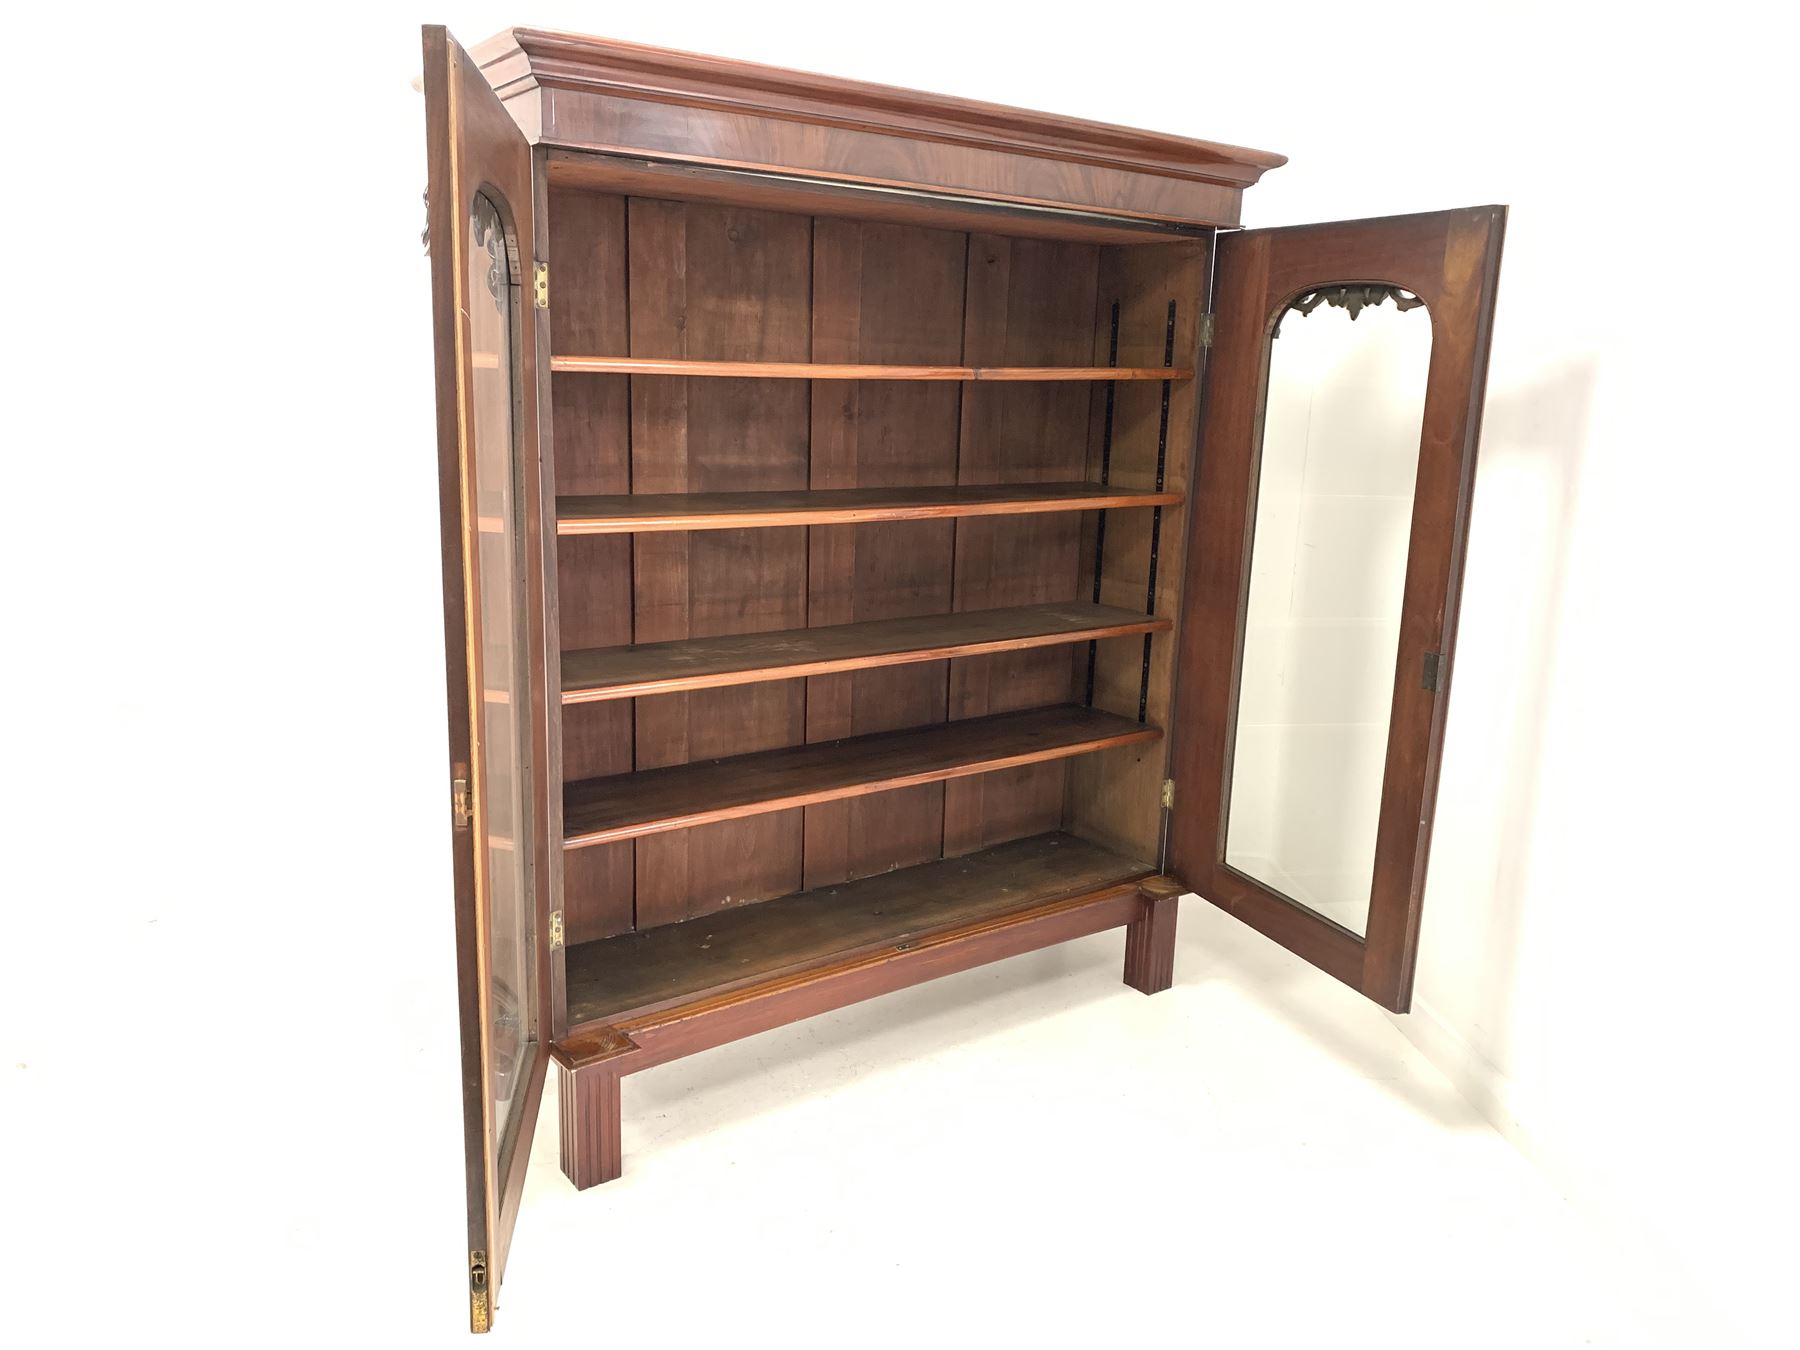 Late Victorian mahogany display cabinet bookcase - Image 2 of 2